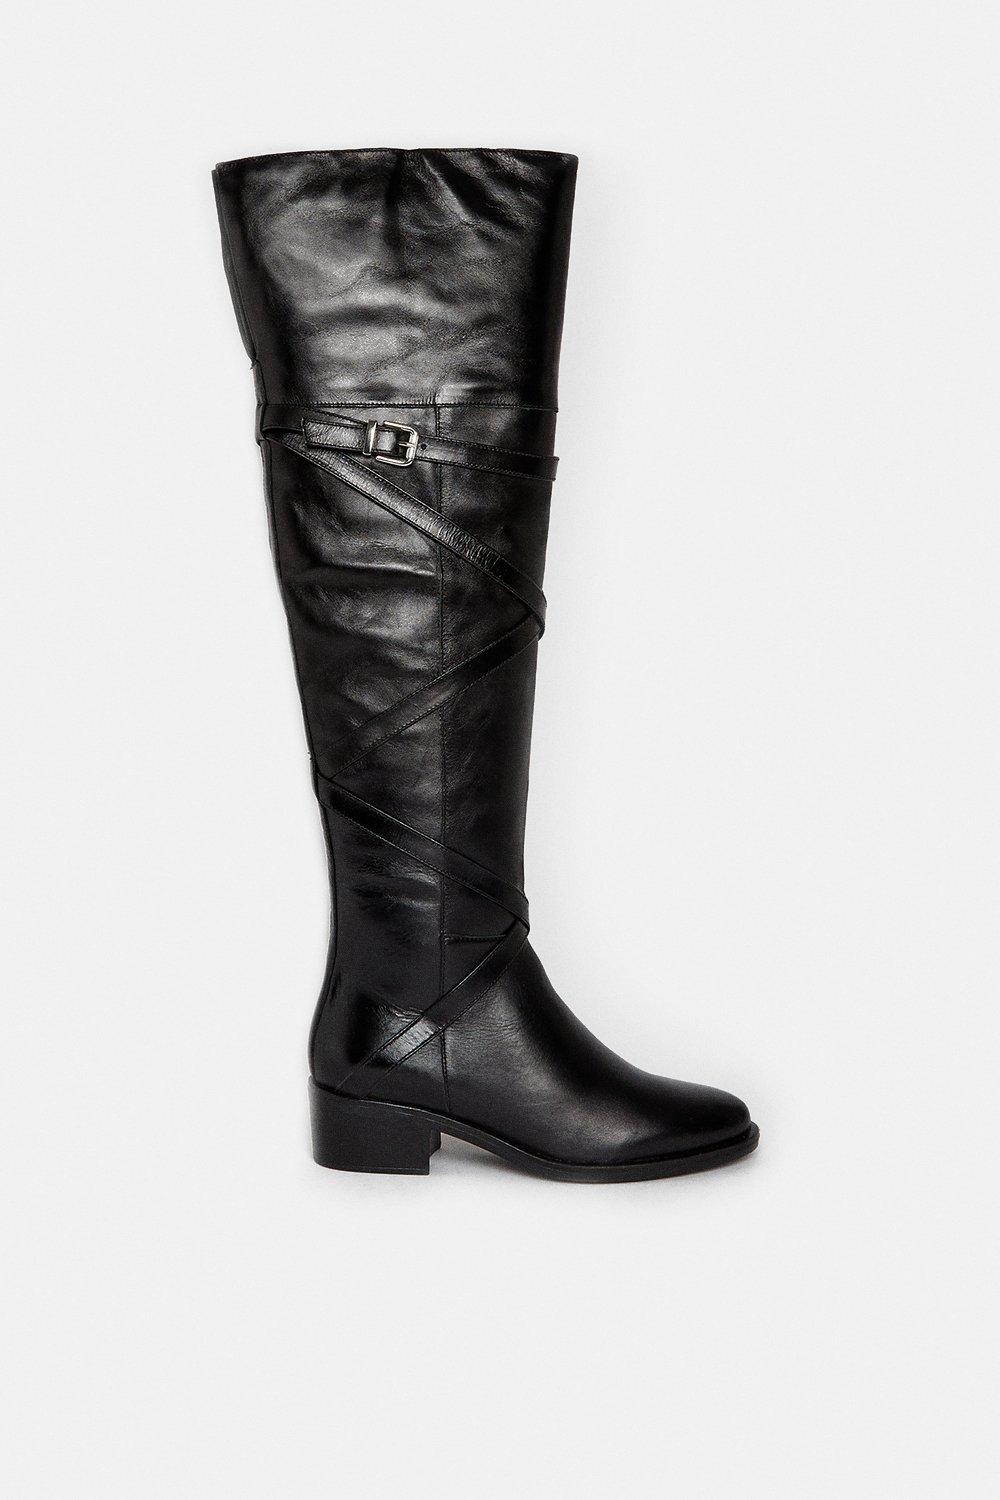 oasis knee high boots